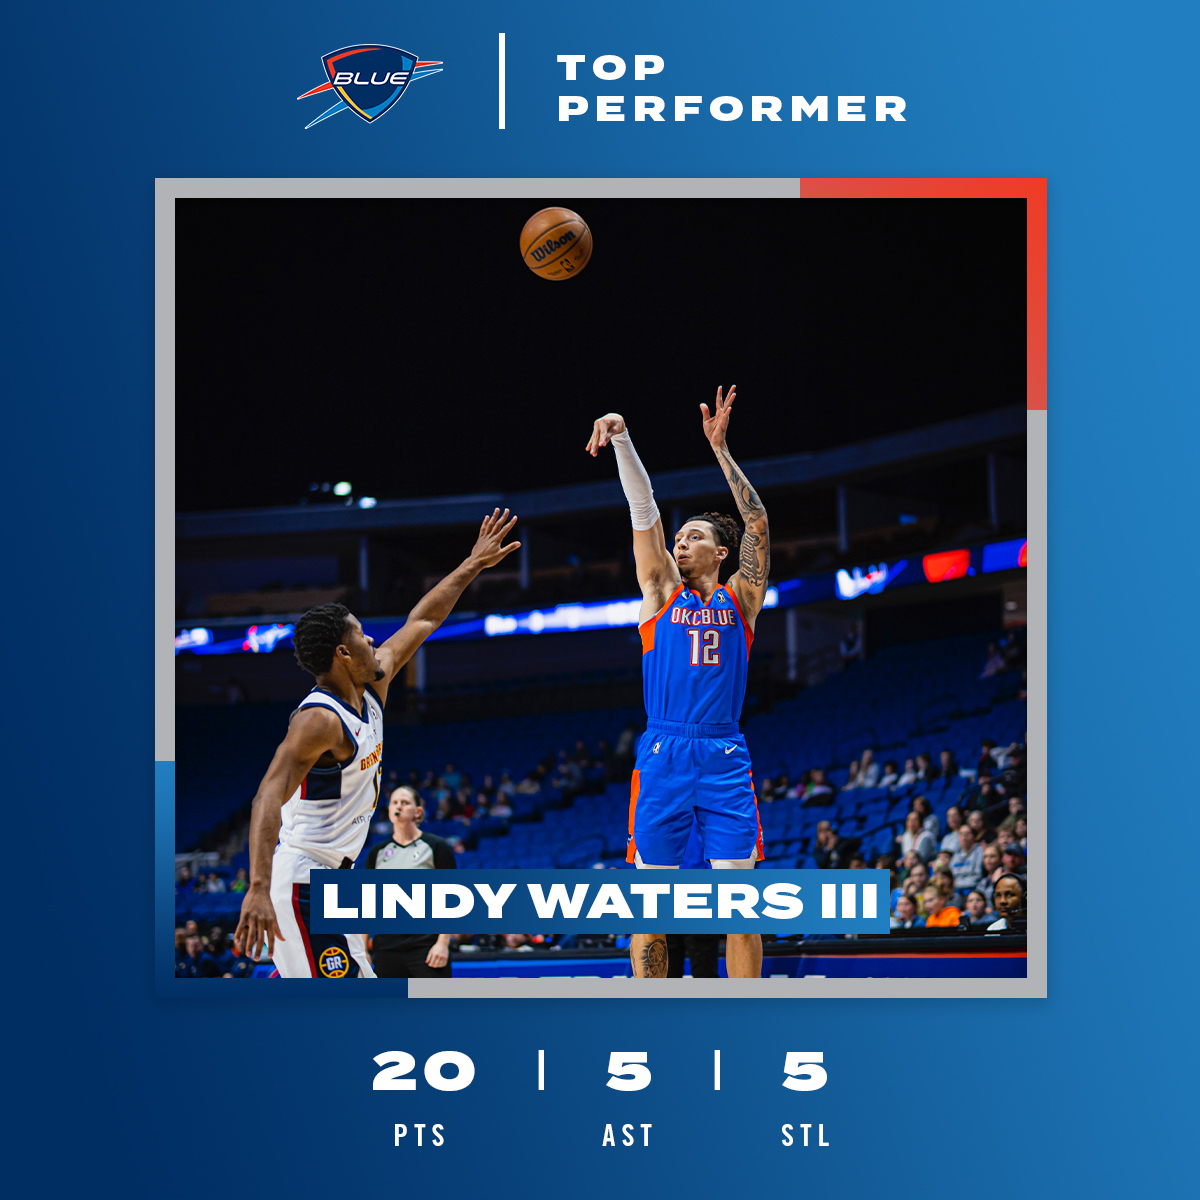 Lindy Waters III came to play! 20 PTS | 5 AST | 5 STL